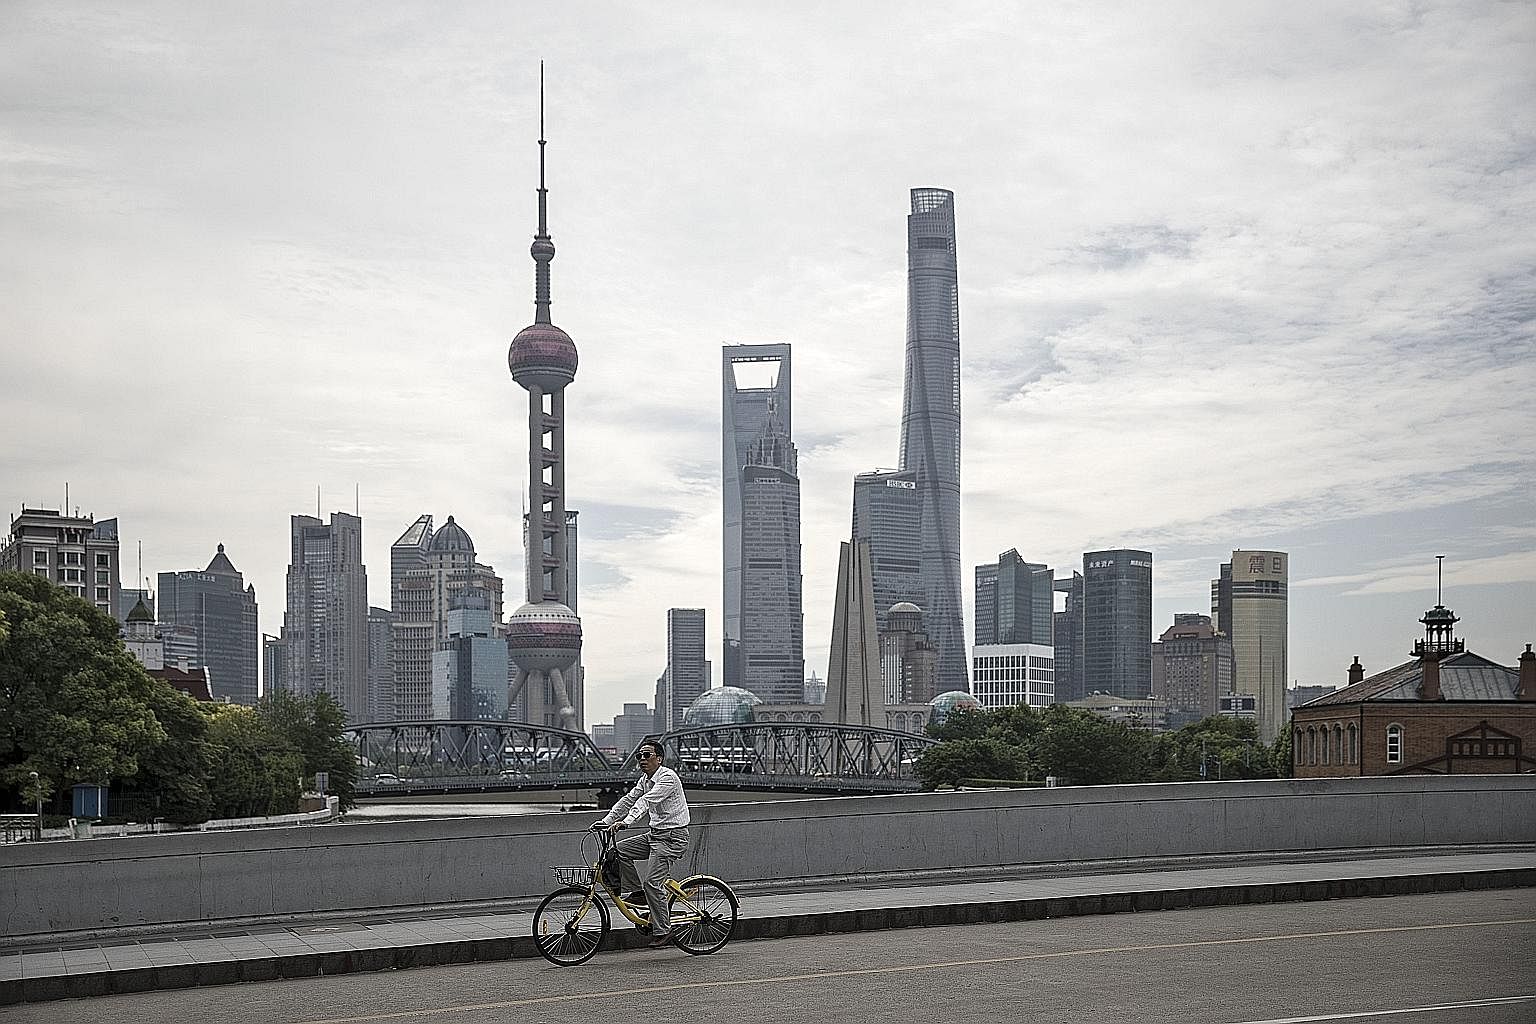 Shanghai, which has some of the world's tallest towers, is facing the growing problem of filling them as China's real estate market undergoes changes.